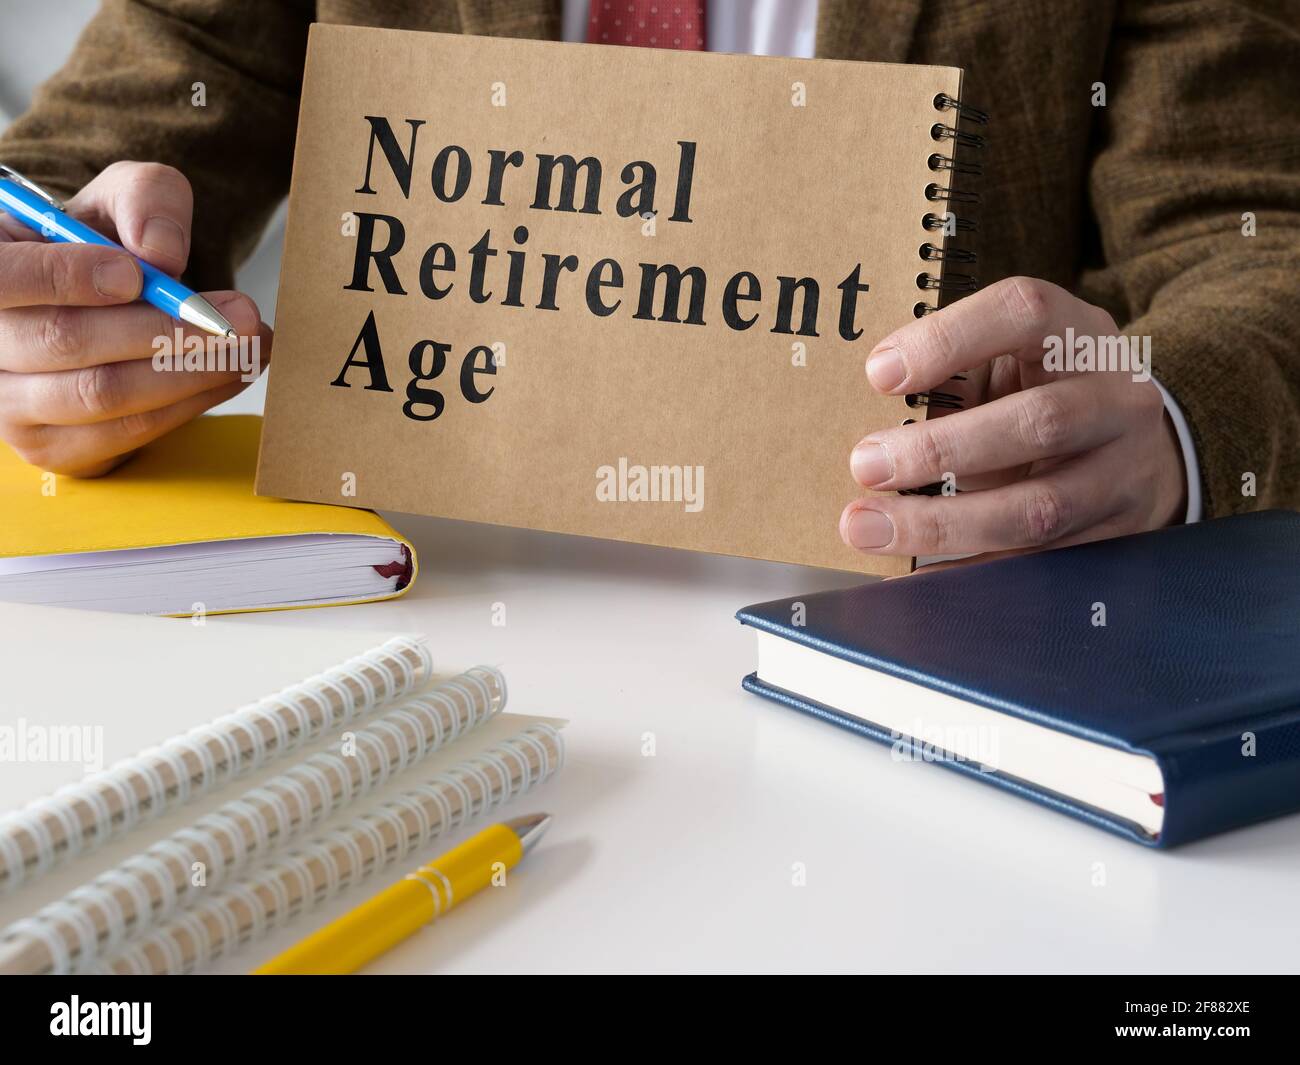 Manager shows Normal Retirement Age NRA data. Stock Photo